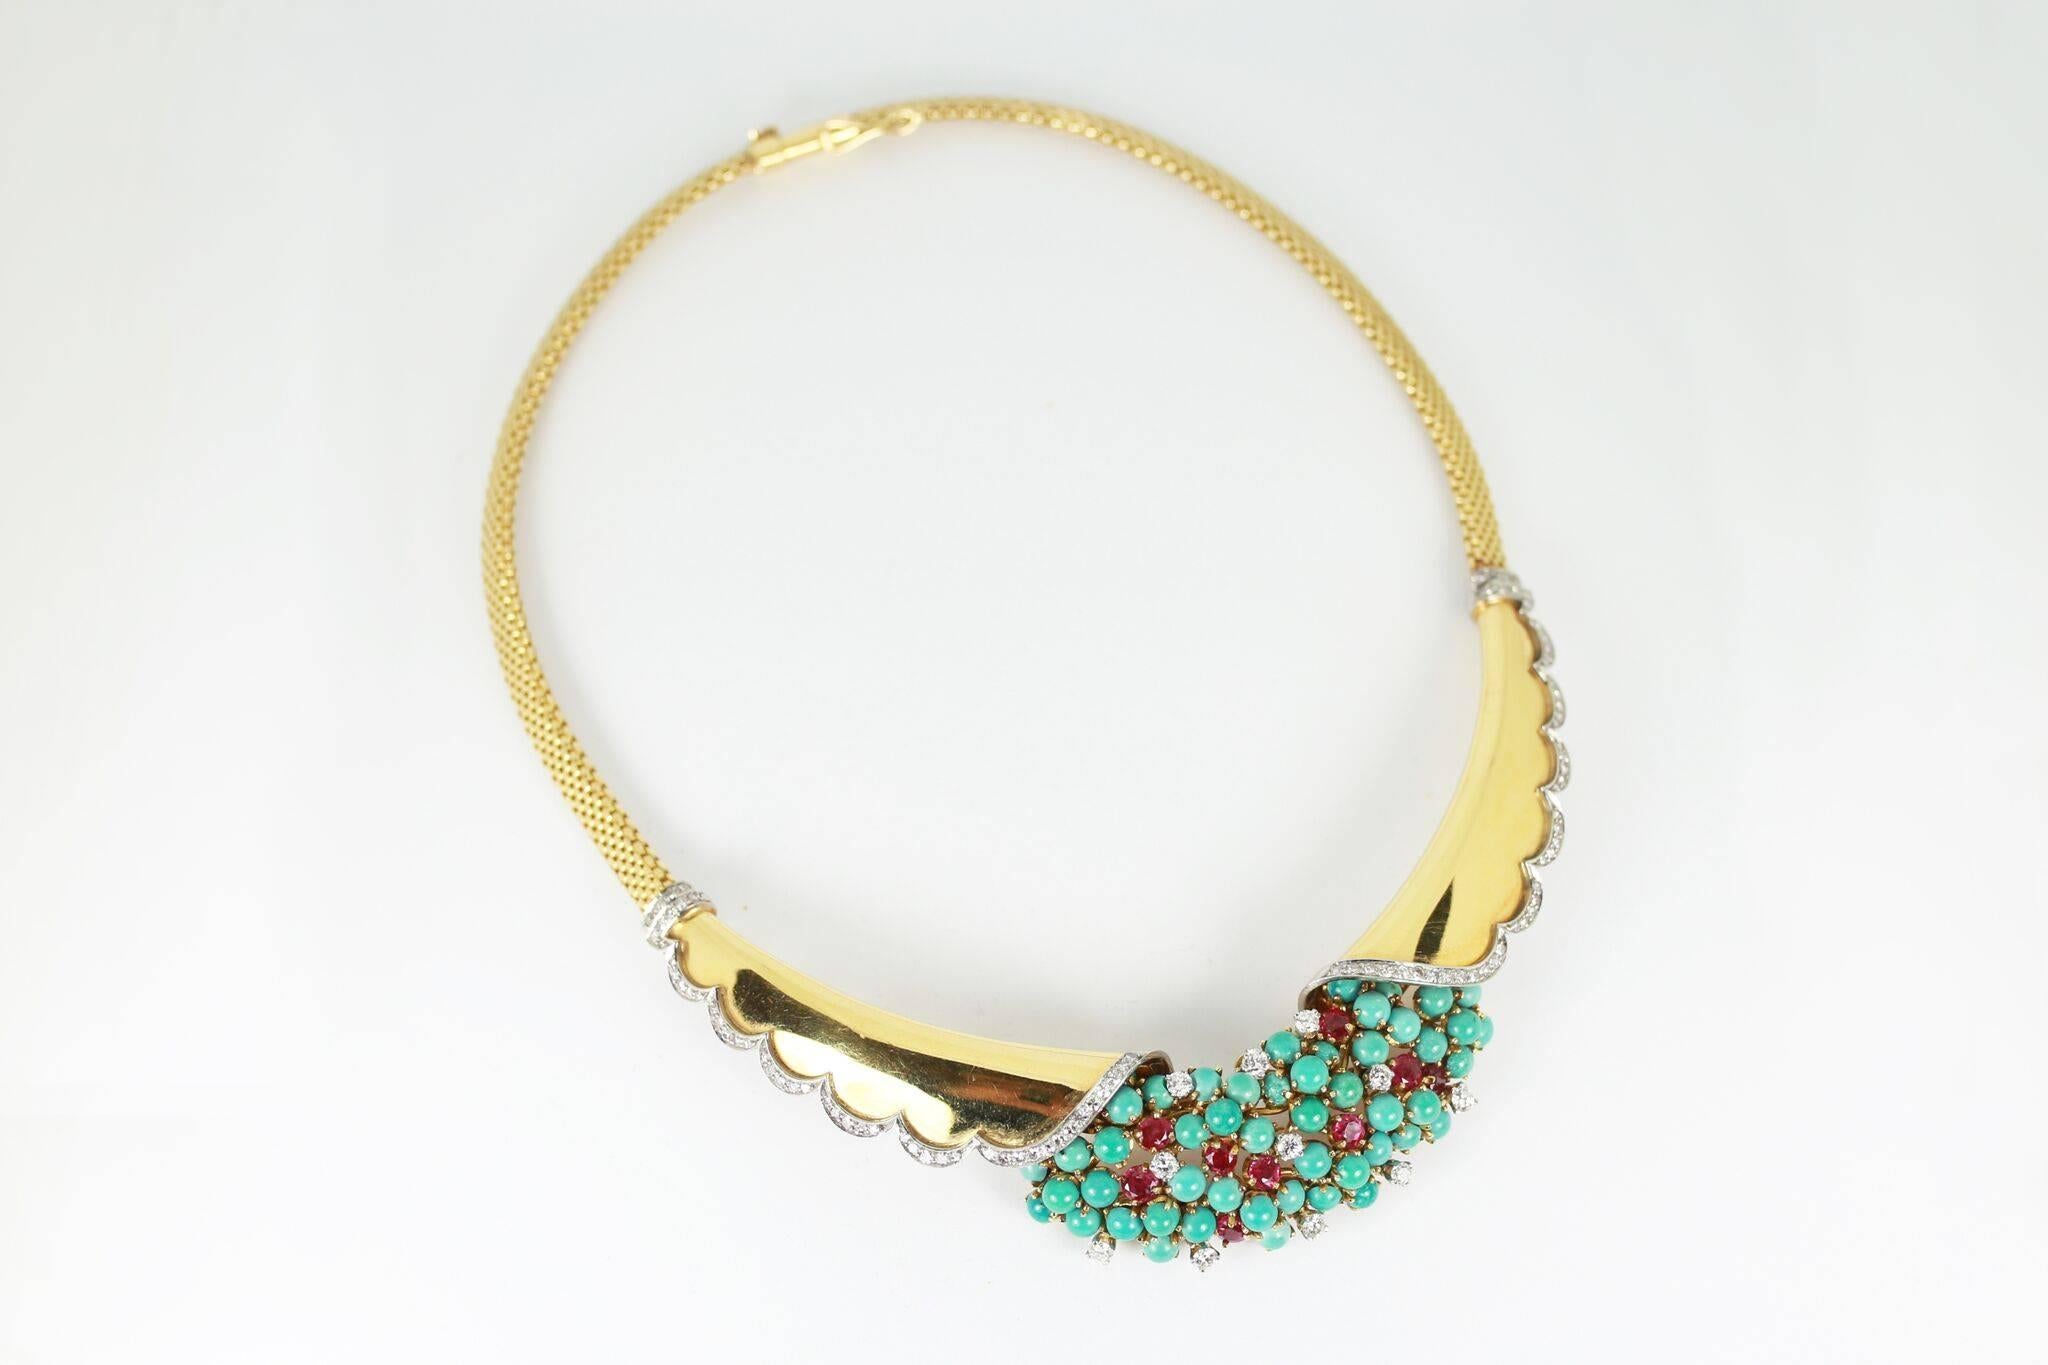 Solid 18K gold necklace inlaid with diamonds, rubies and turquoise stones.